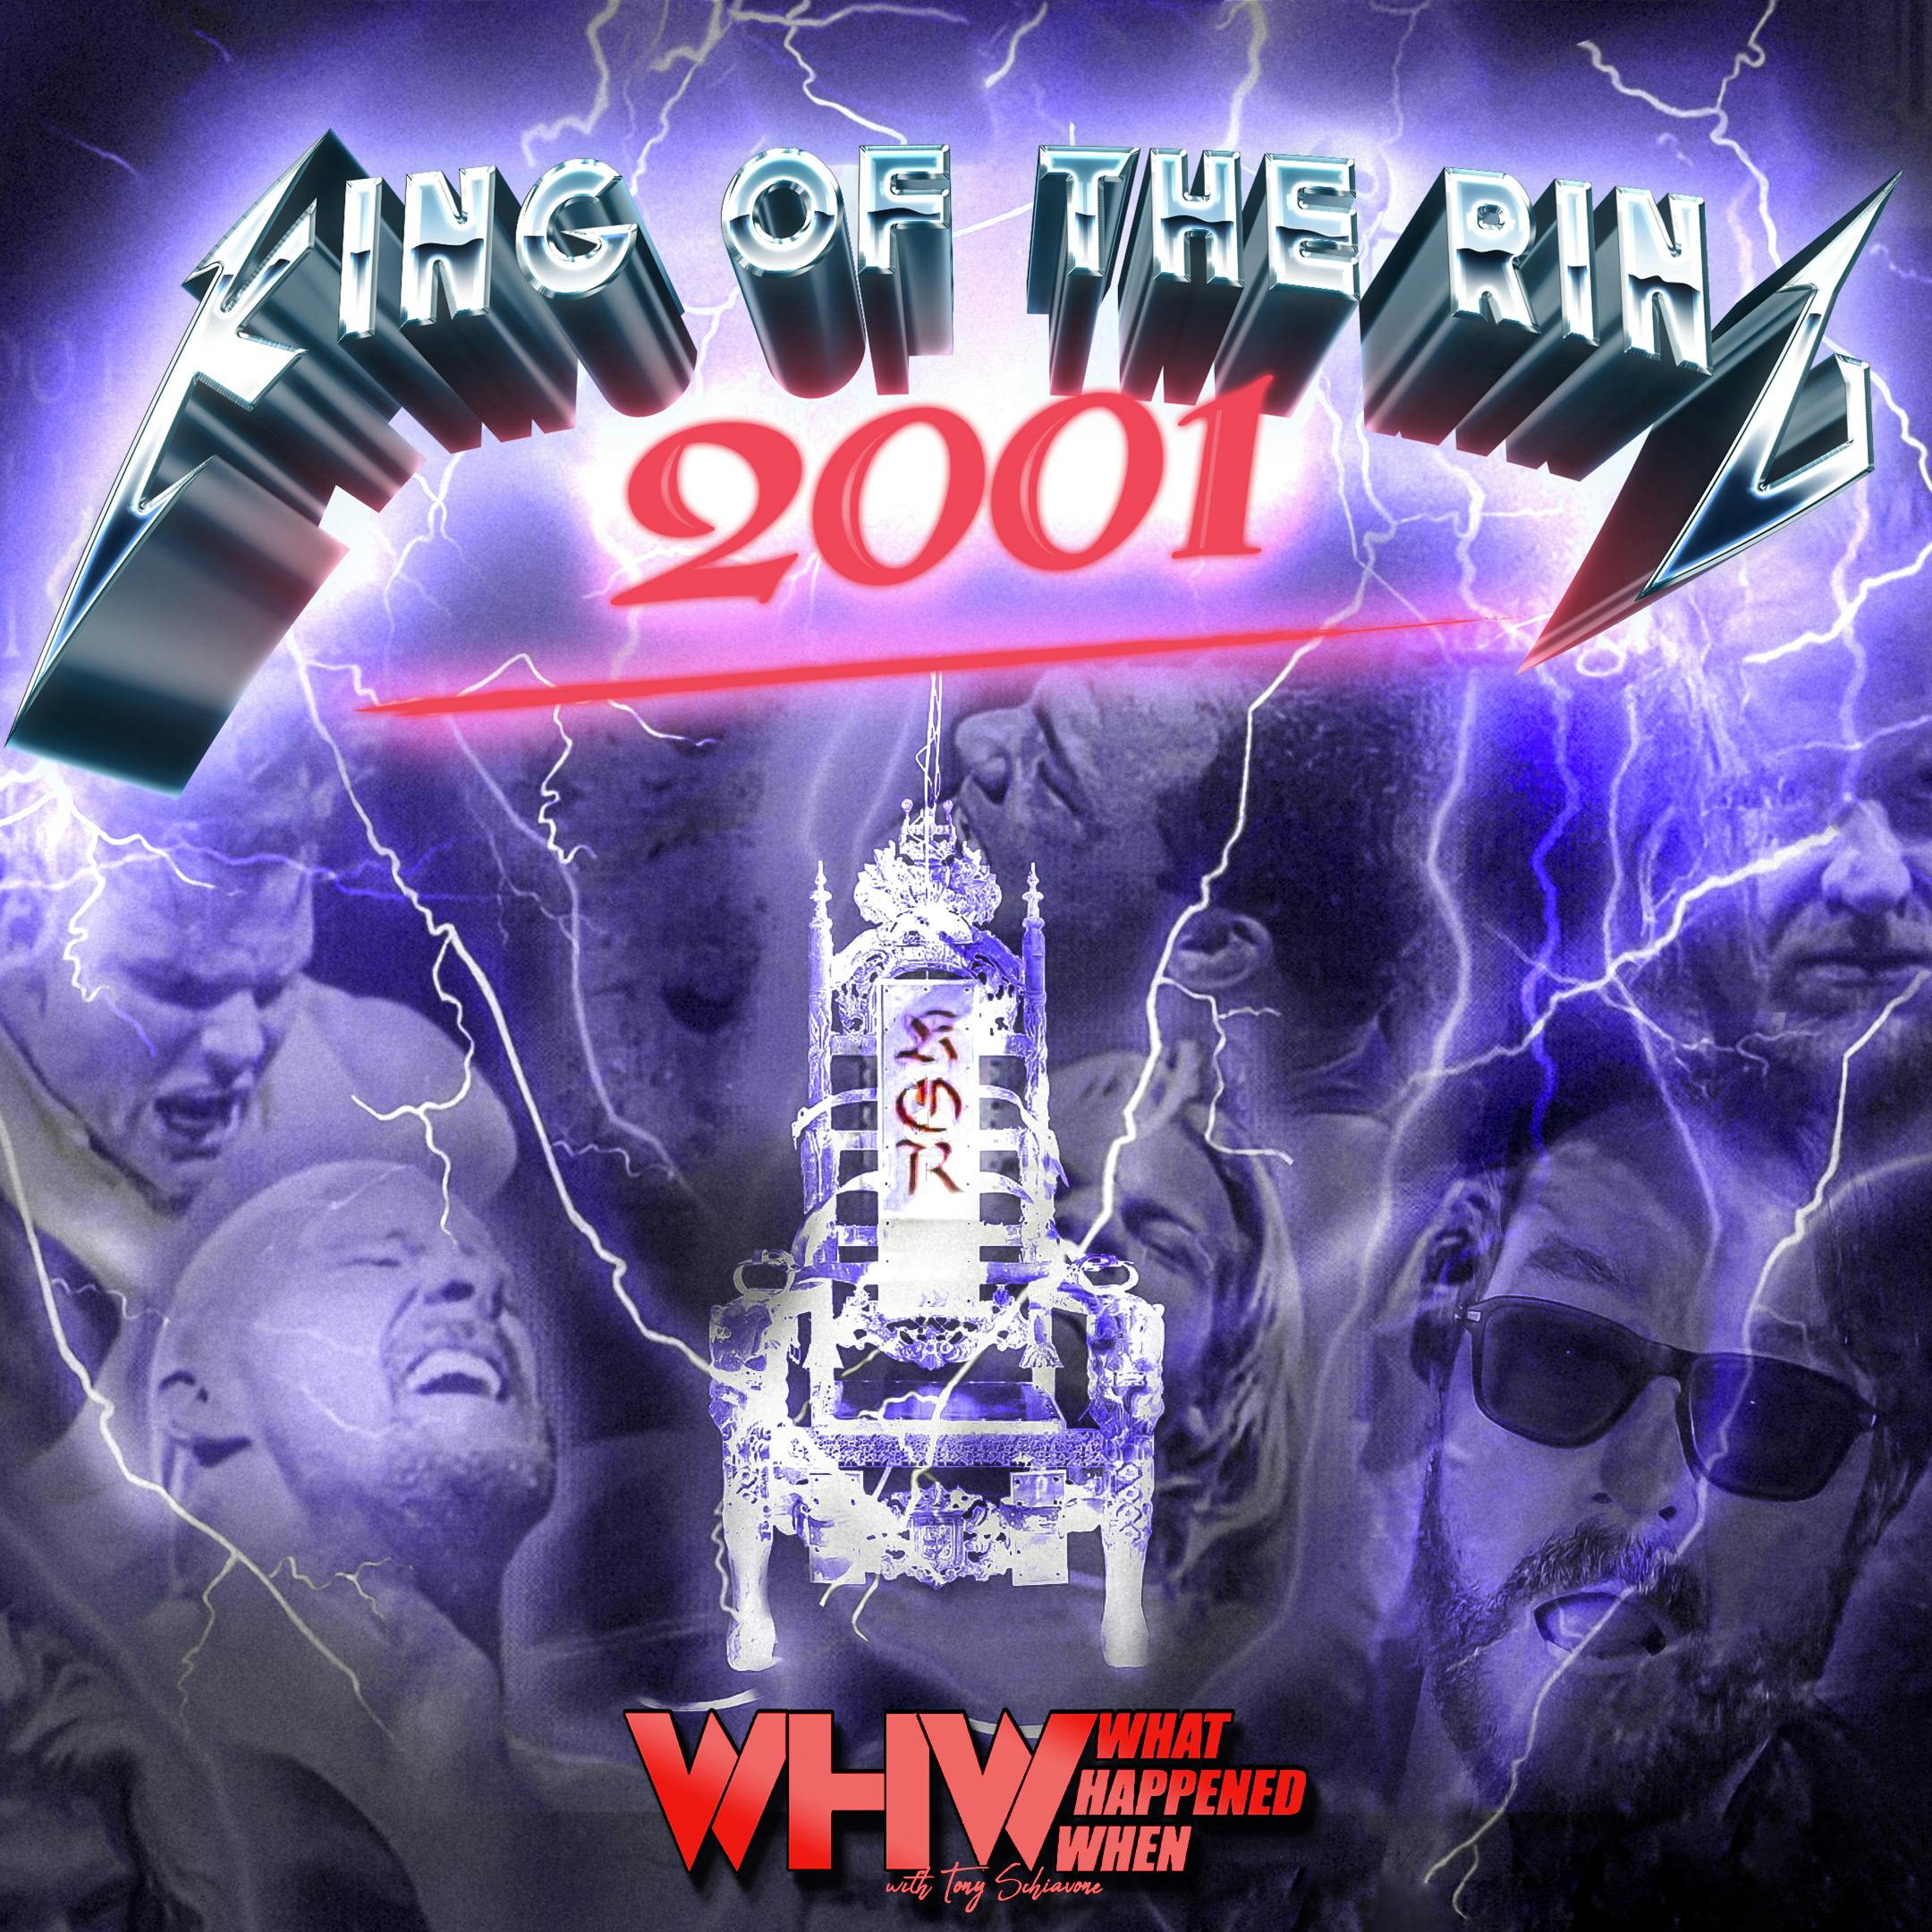 Episode 322: King Of The Ring 2001